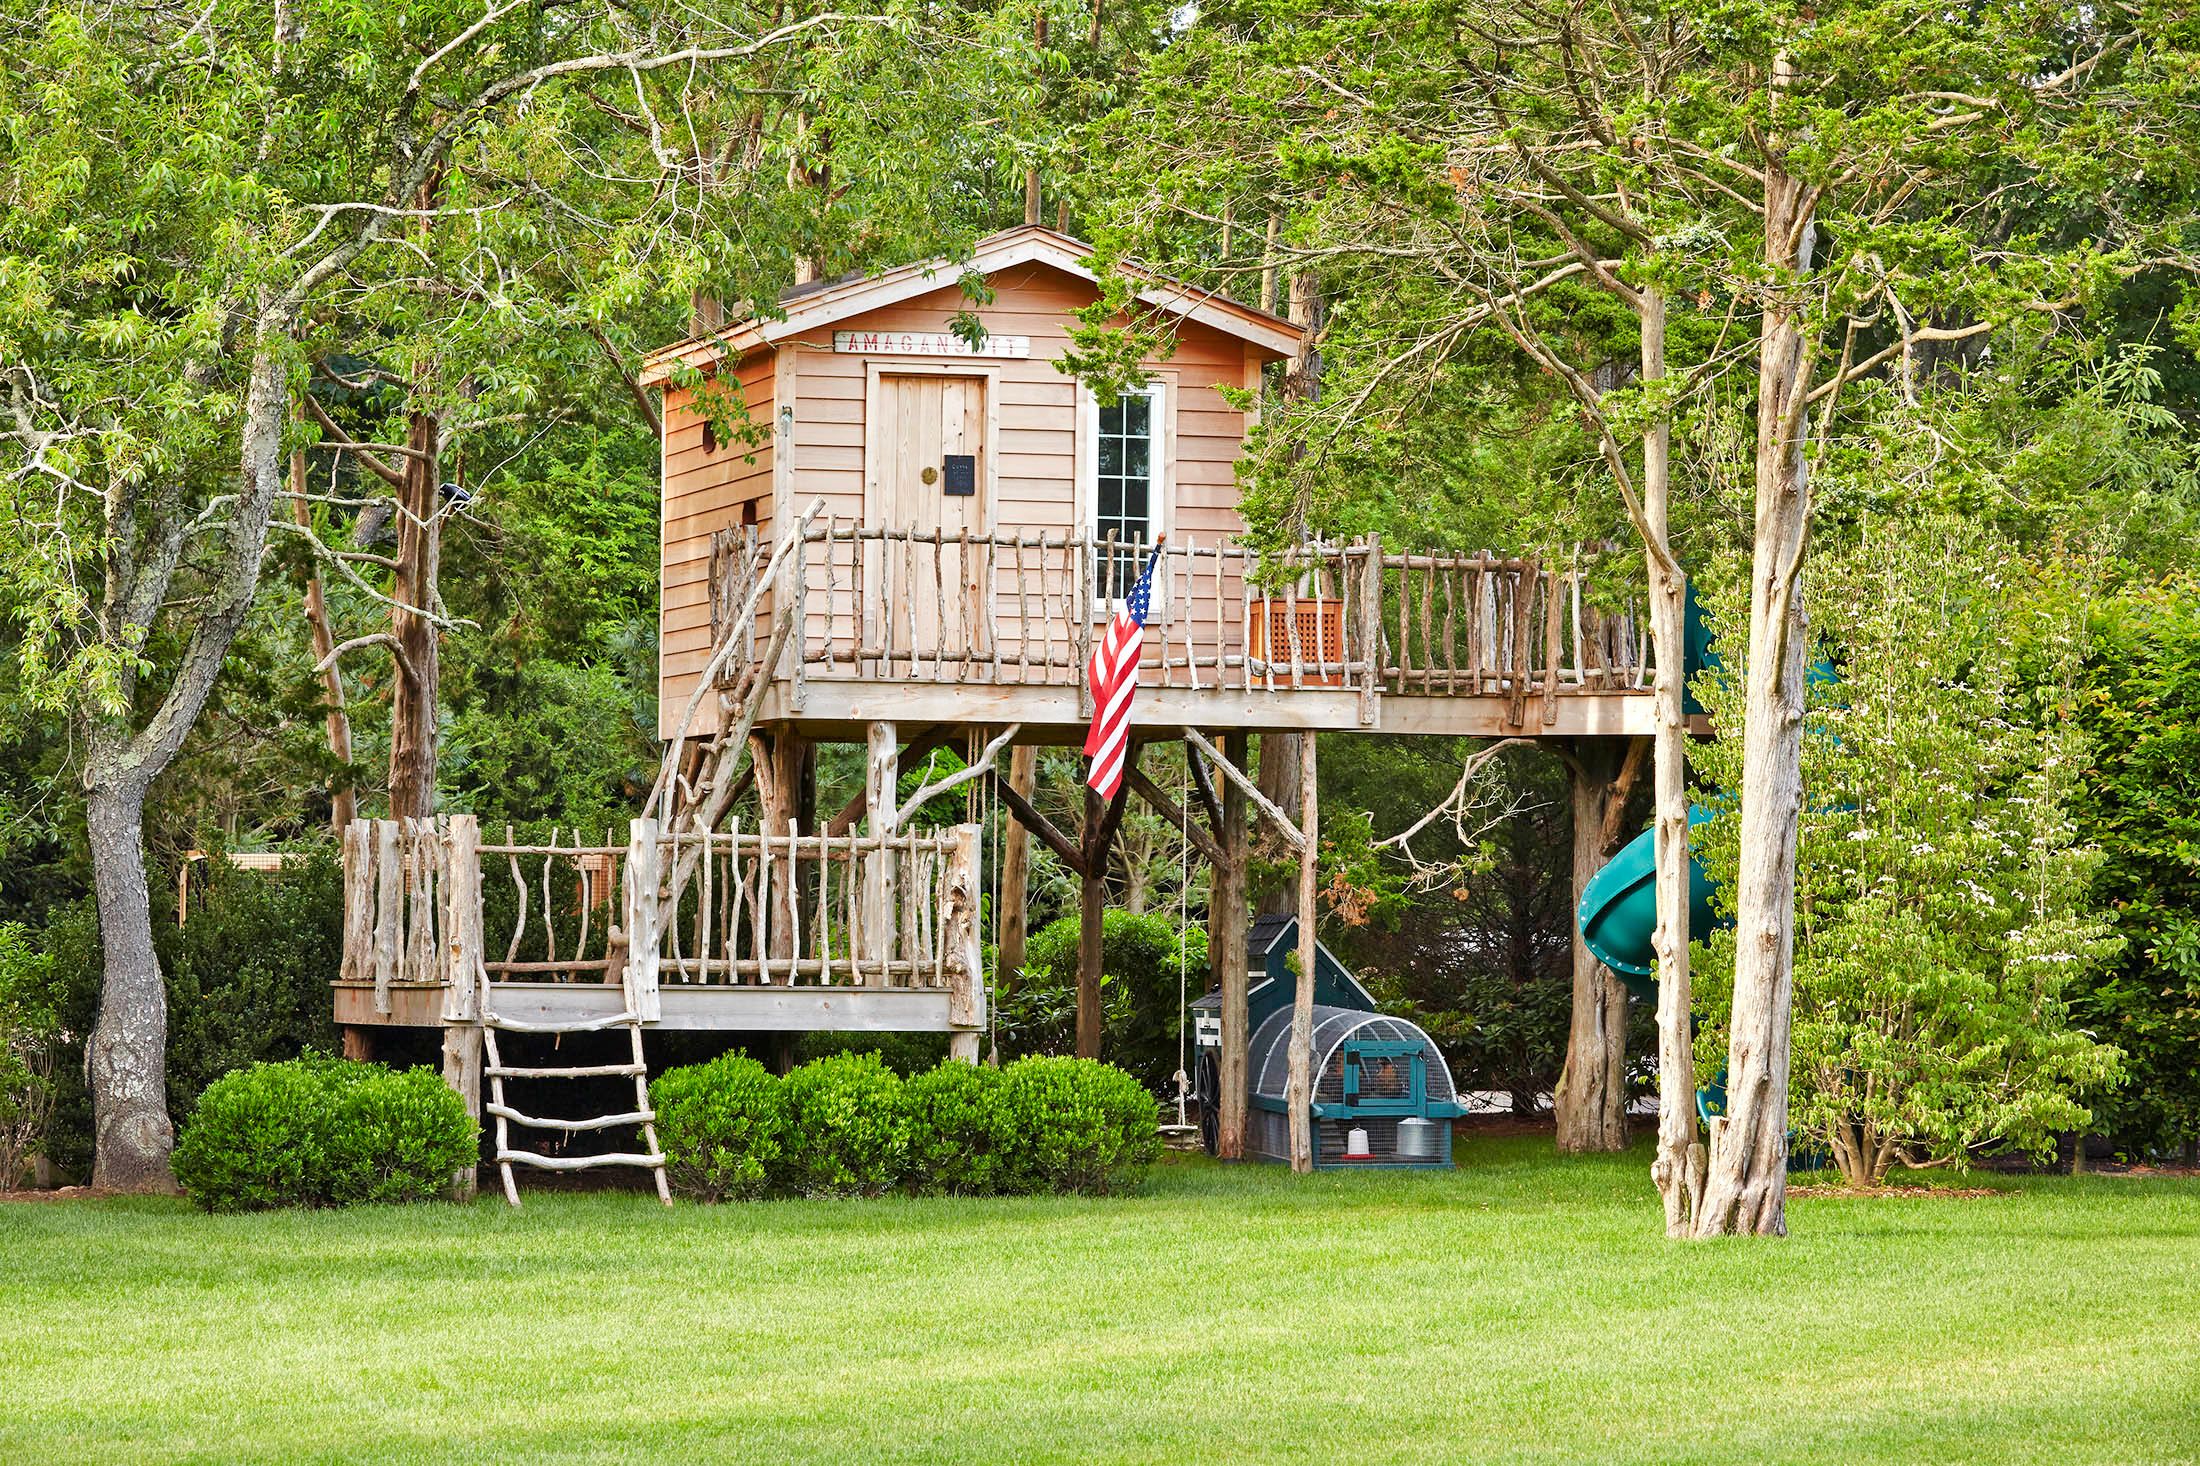 20 Best Treehouse Ideas For Kids - Cool Diy Tree House Designs